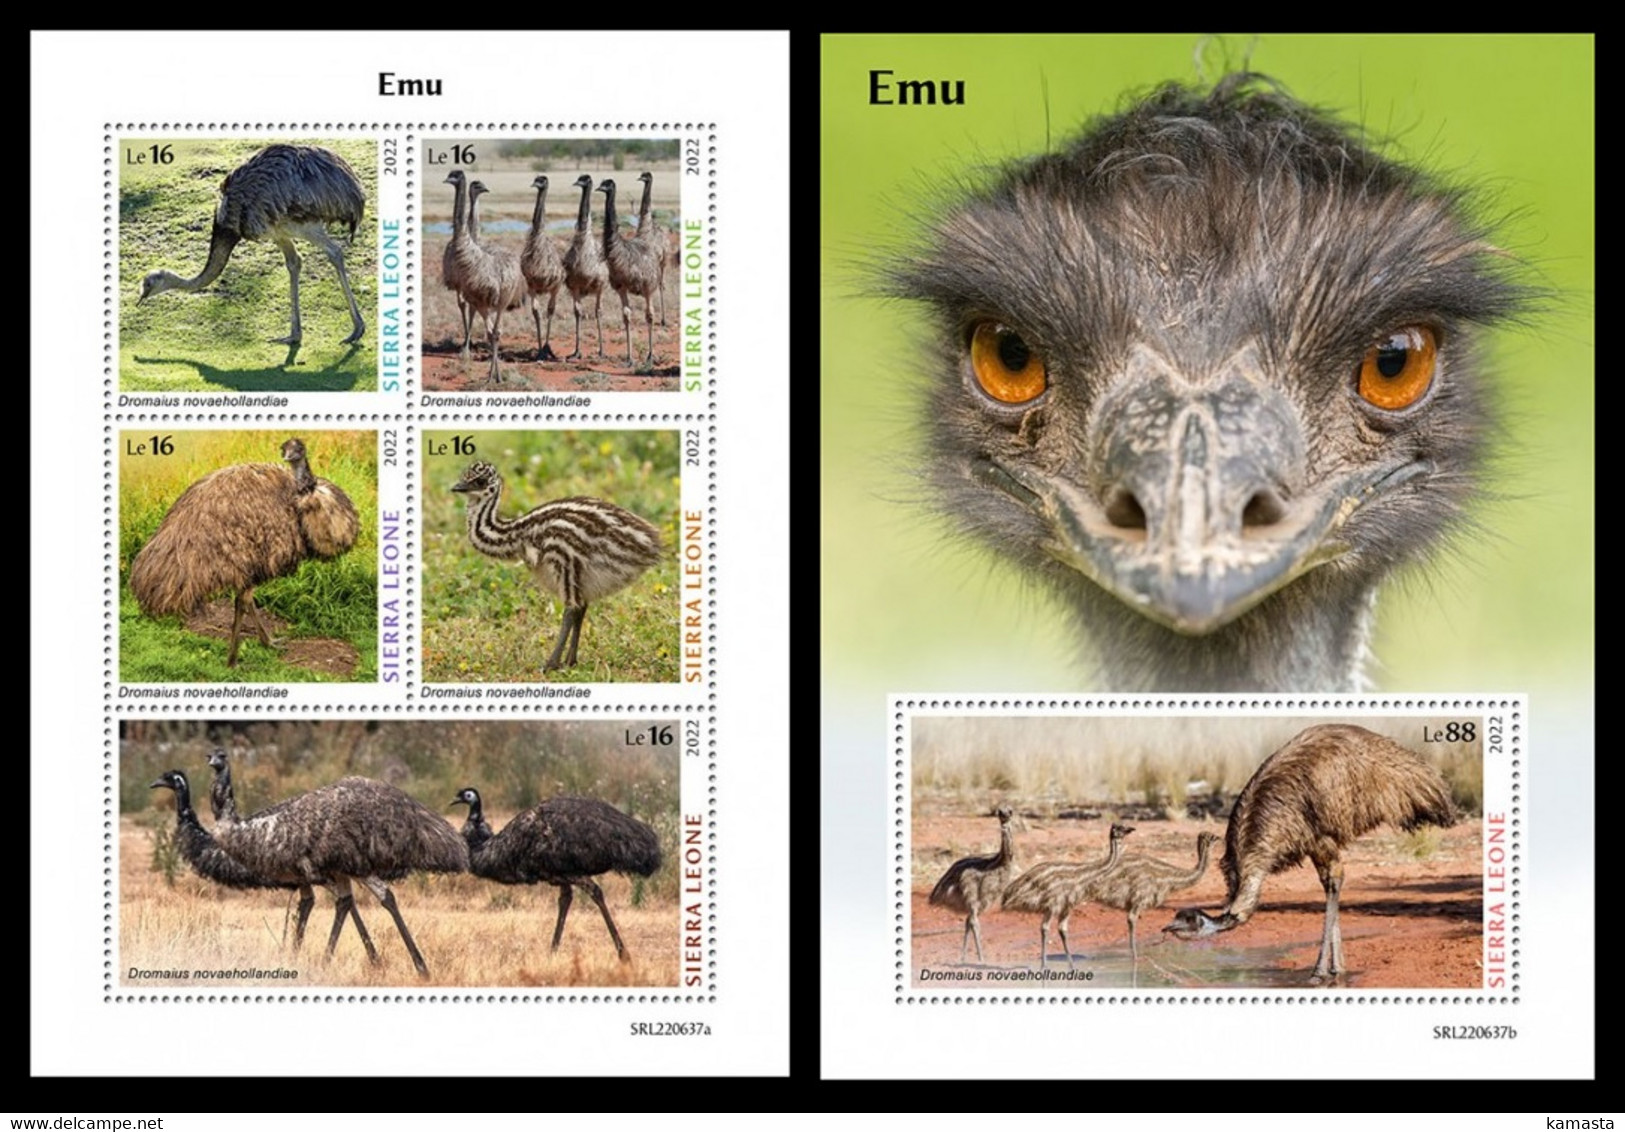 Sierra Leone  2022 Emu. (637) OFFICIAL ISSUE - Ostriches